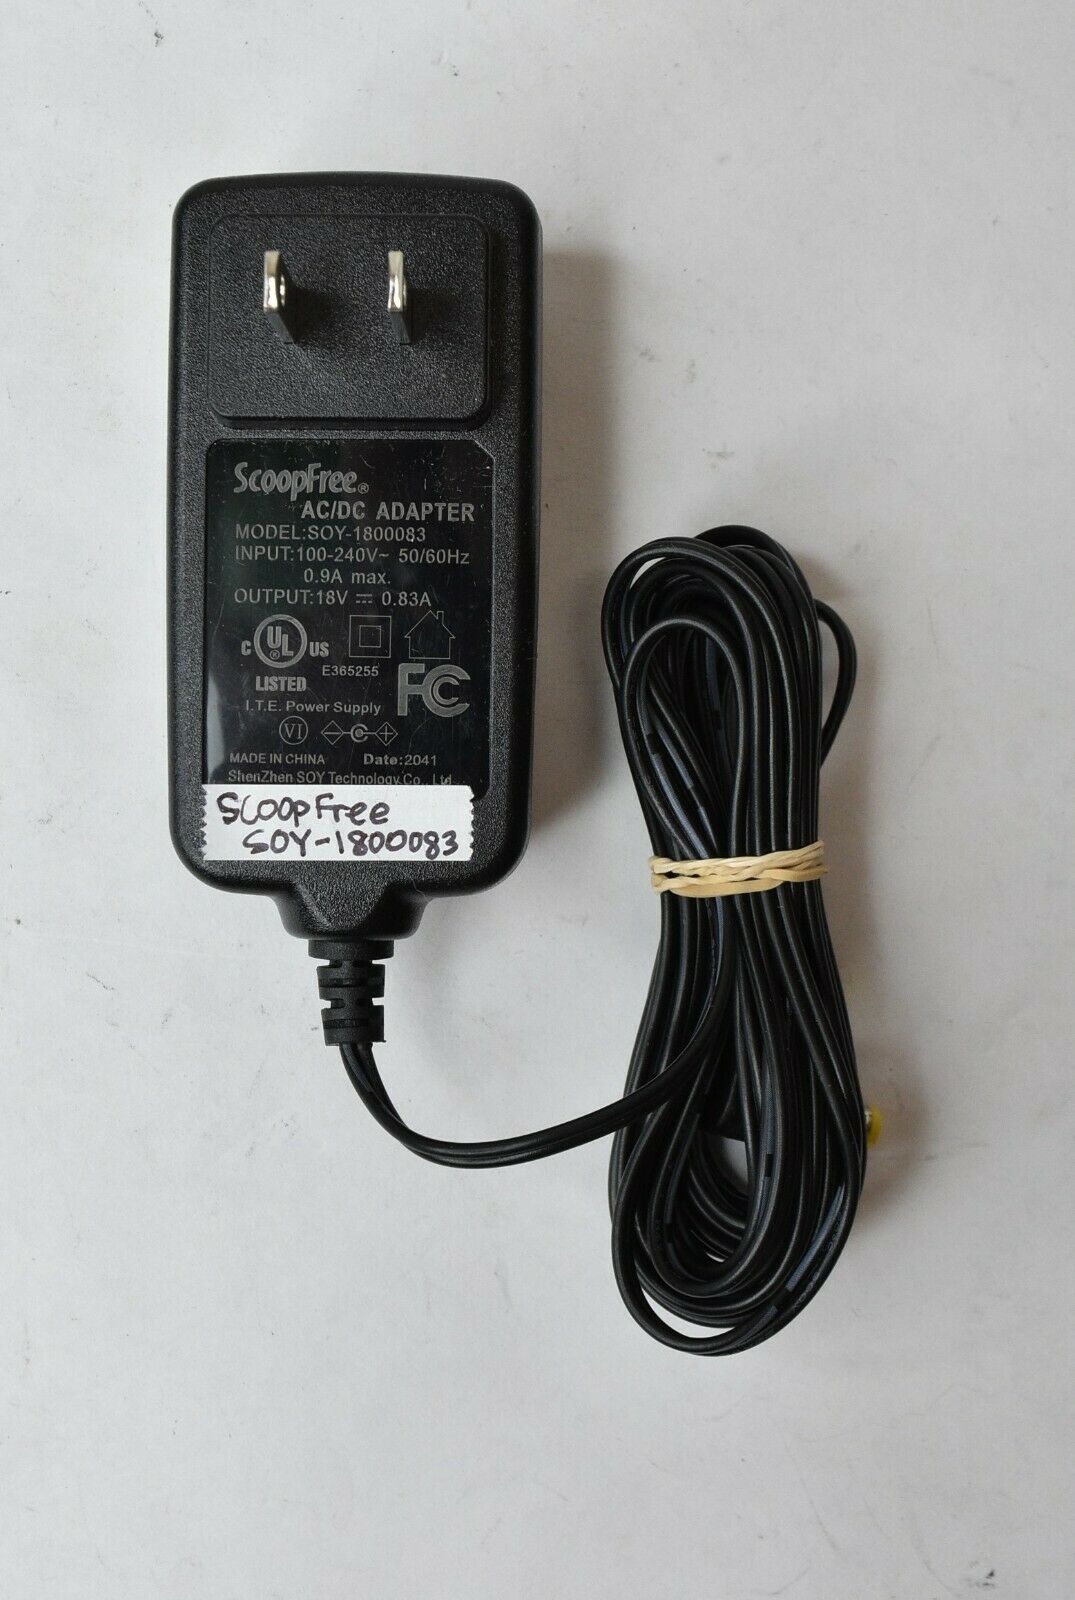 ScoopFree AC/DC Adapter Power Supply Unit SOY-280003 28V 0.83A 5.5-2.5mm tip Type: AC/DC Adapter Output Voltage: 28